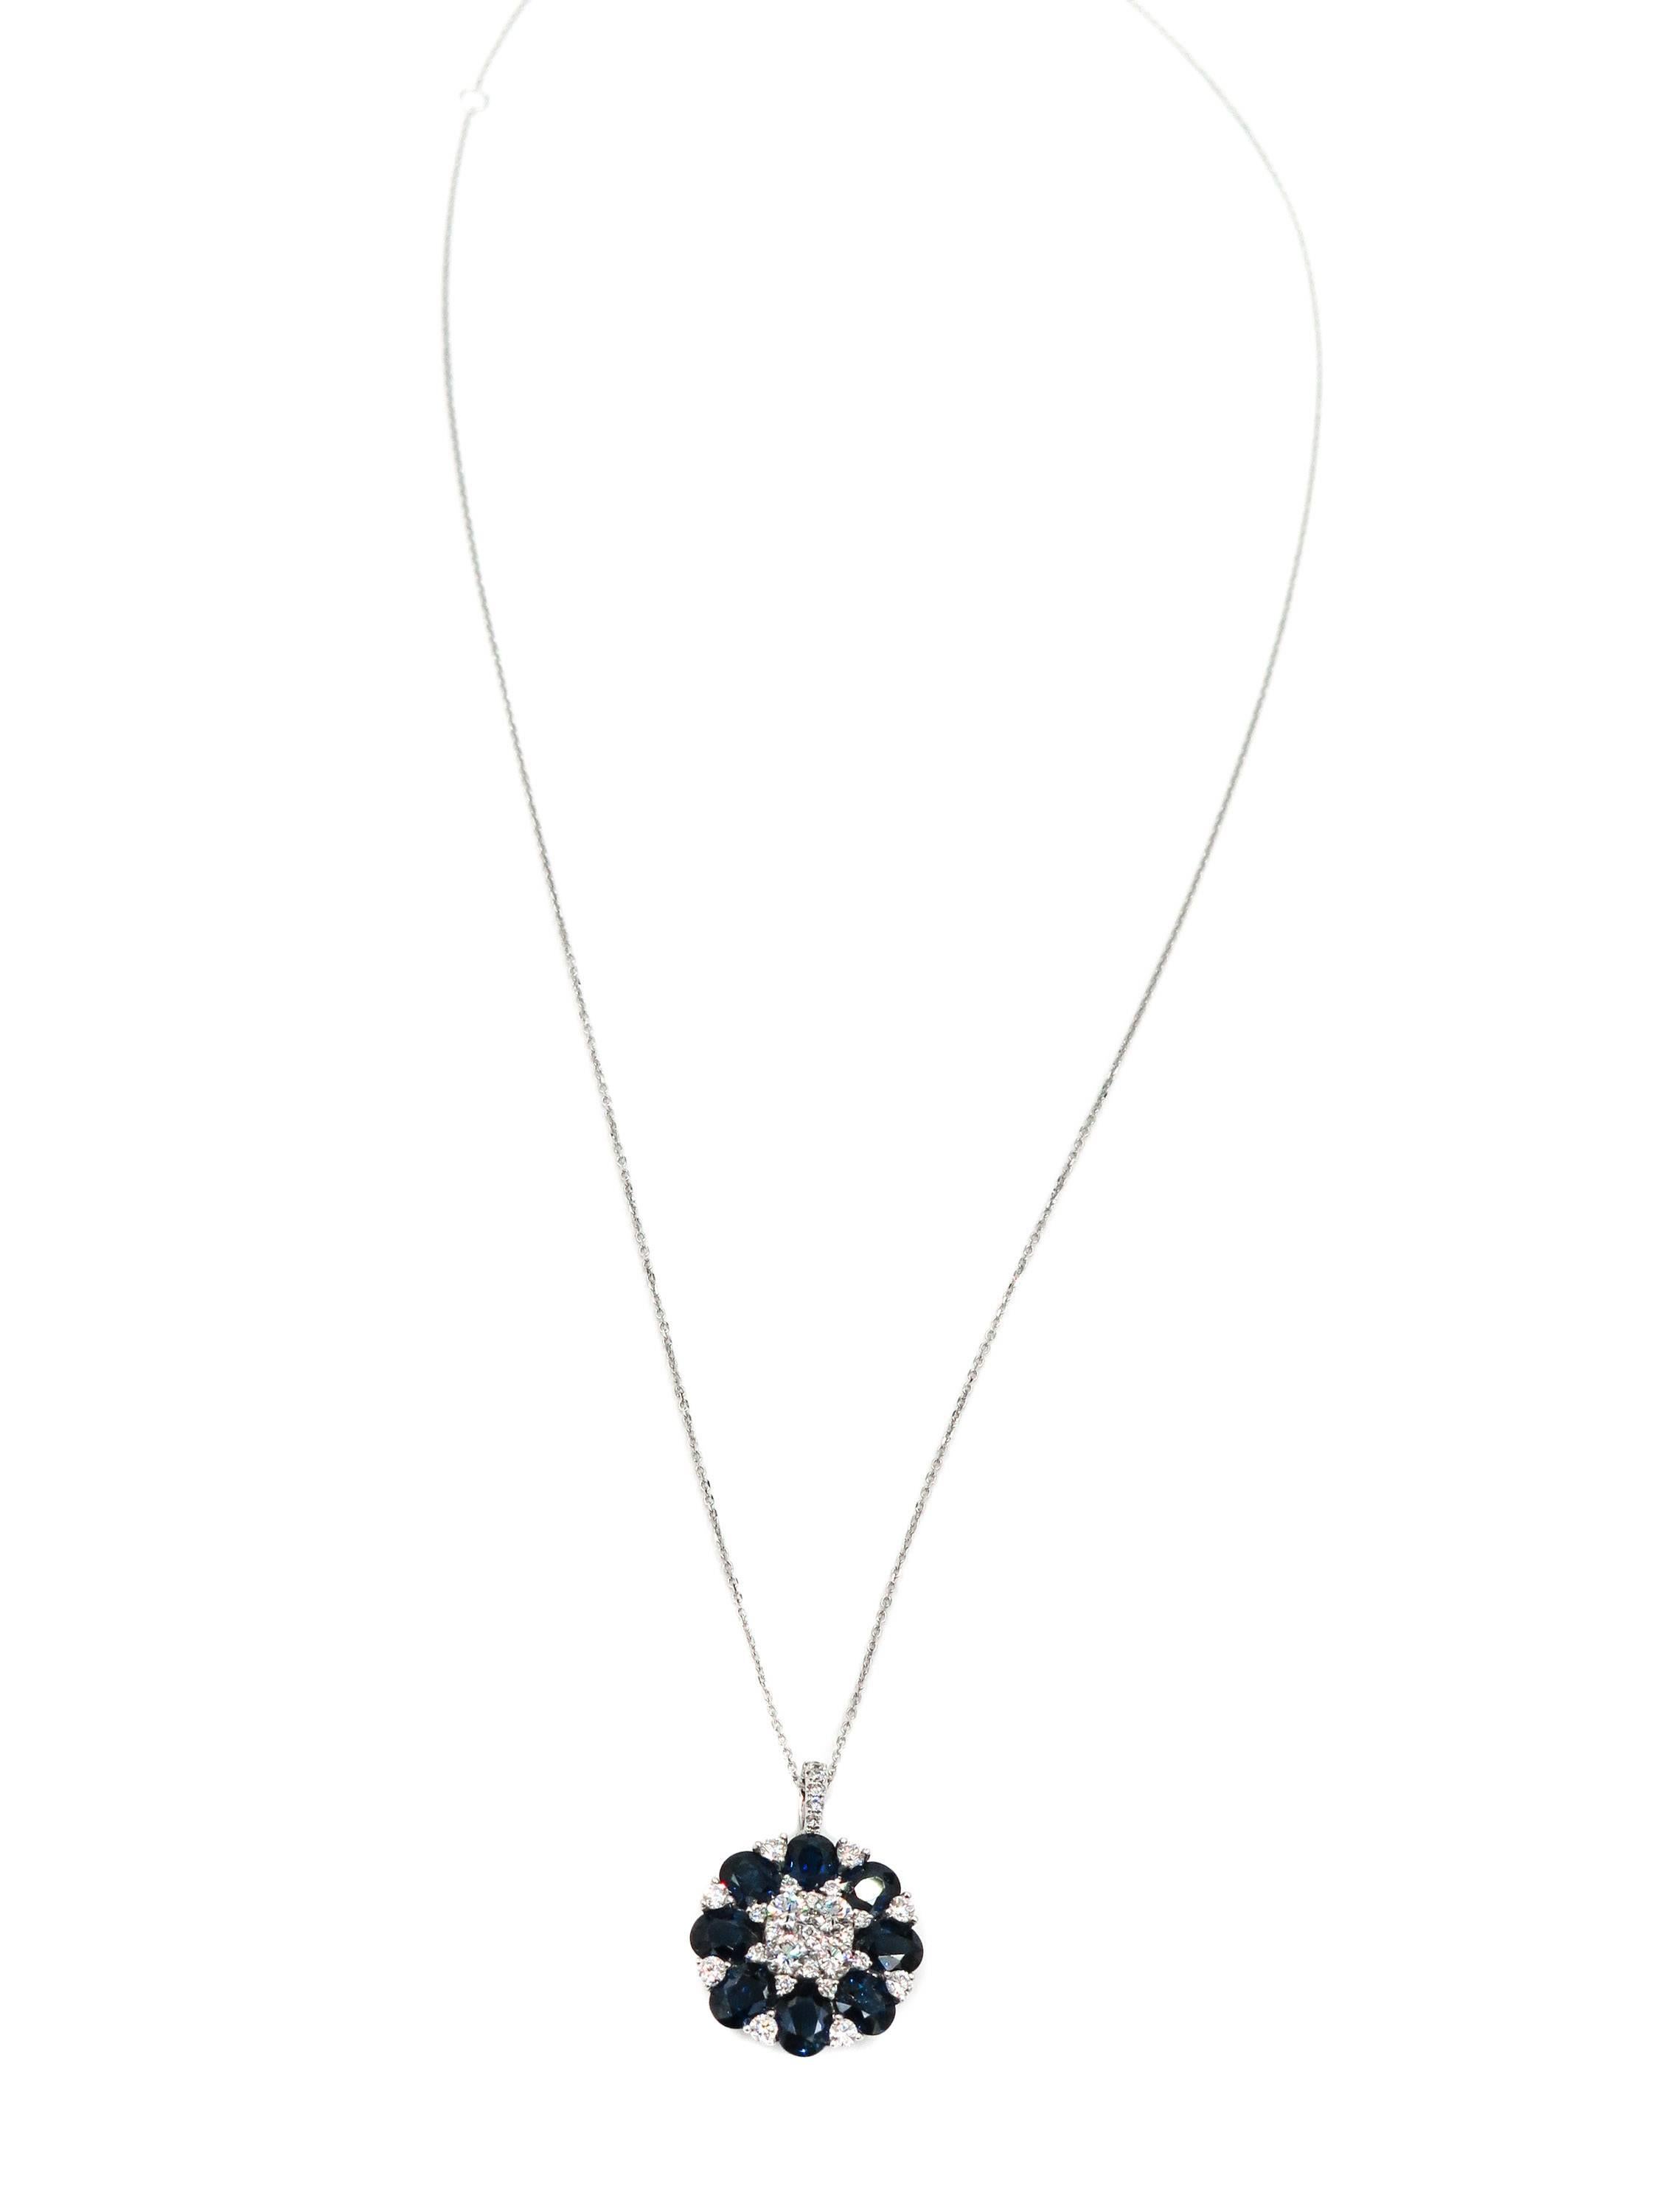 When words are not enough... colors and shapes can speak for themselves. 
Eight oval cut blue sapphires, enriched by 31 round brilliant cut diamonds bloom into this beautiful pendant.  
Creatively crafted in 18 karat white gold, with 3.64 carats of